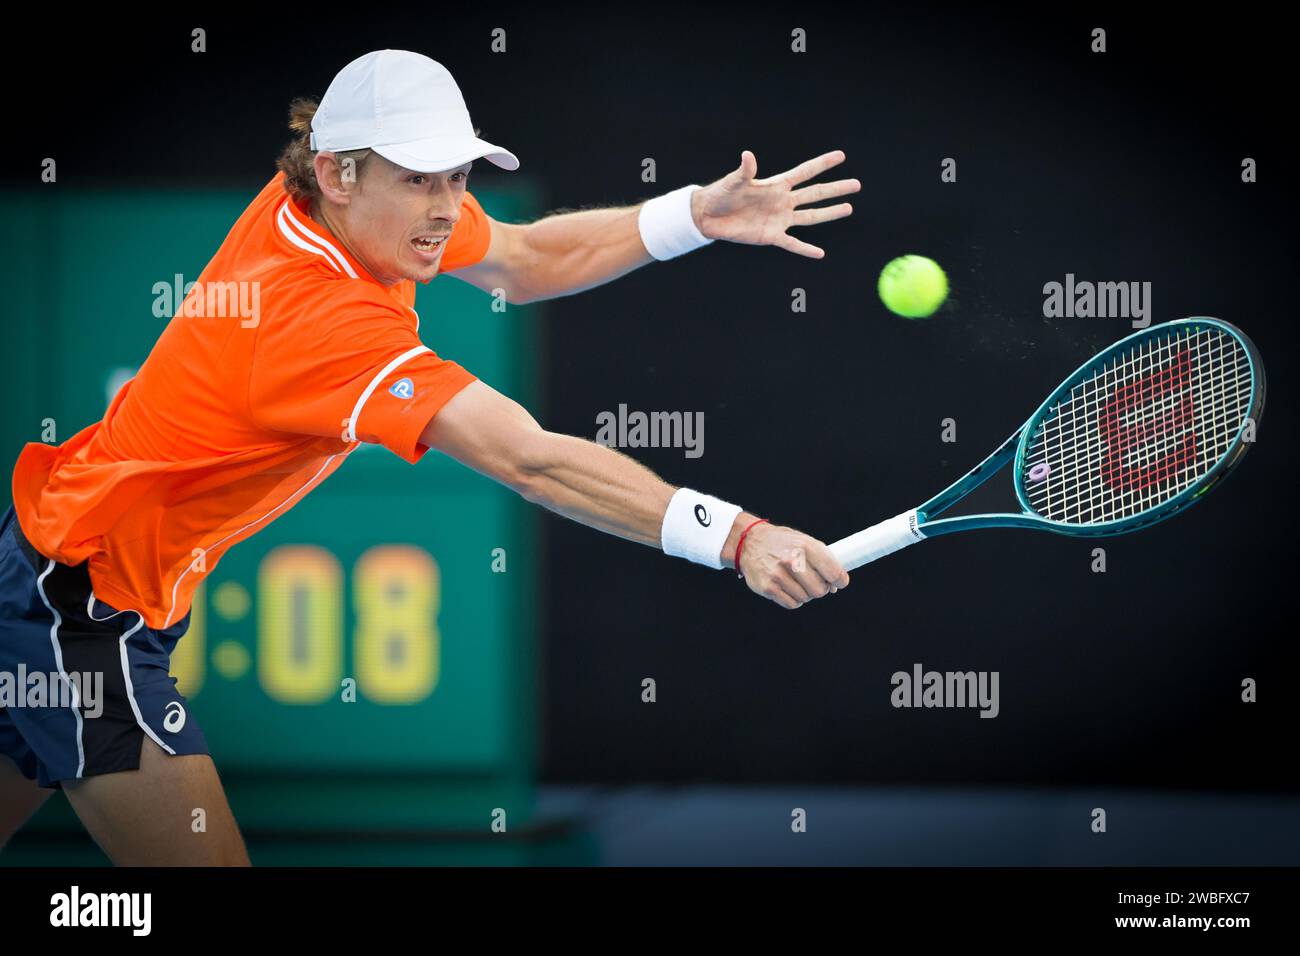 January 10, 2024: Alex de Minaur of Australia in action against Carlos Alcaraz of Spain on Rod Laver Arena in an exhibition match for the Australian Tennis Foundation ahead of the Australian Open which starts on 14 January. De Minaur won 6:4 7:5 10:3 Sydney Low/Cal Sport Media Stock Photo